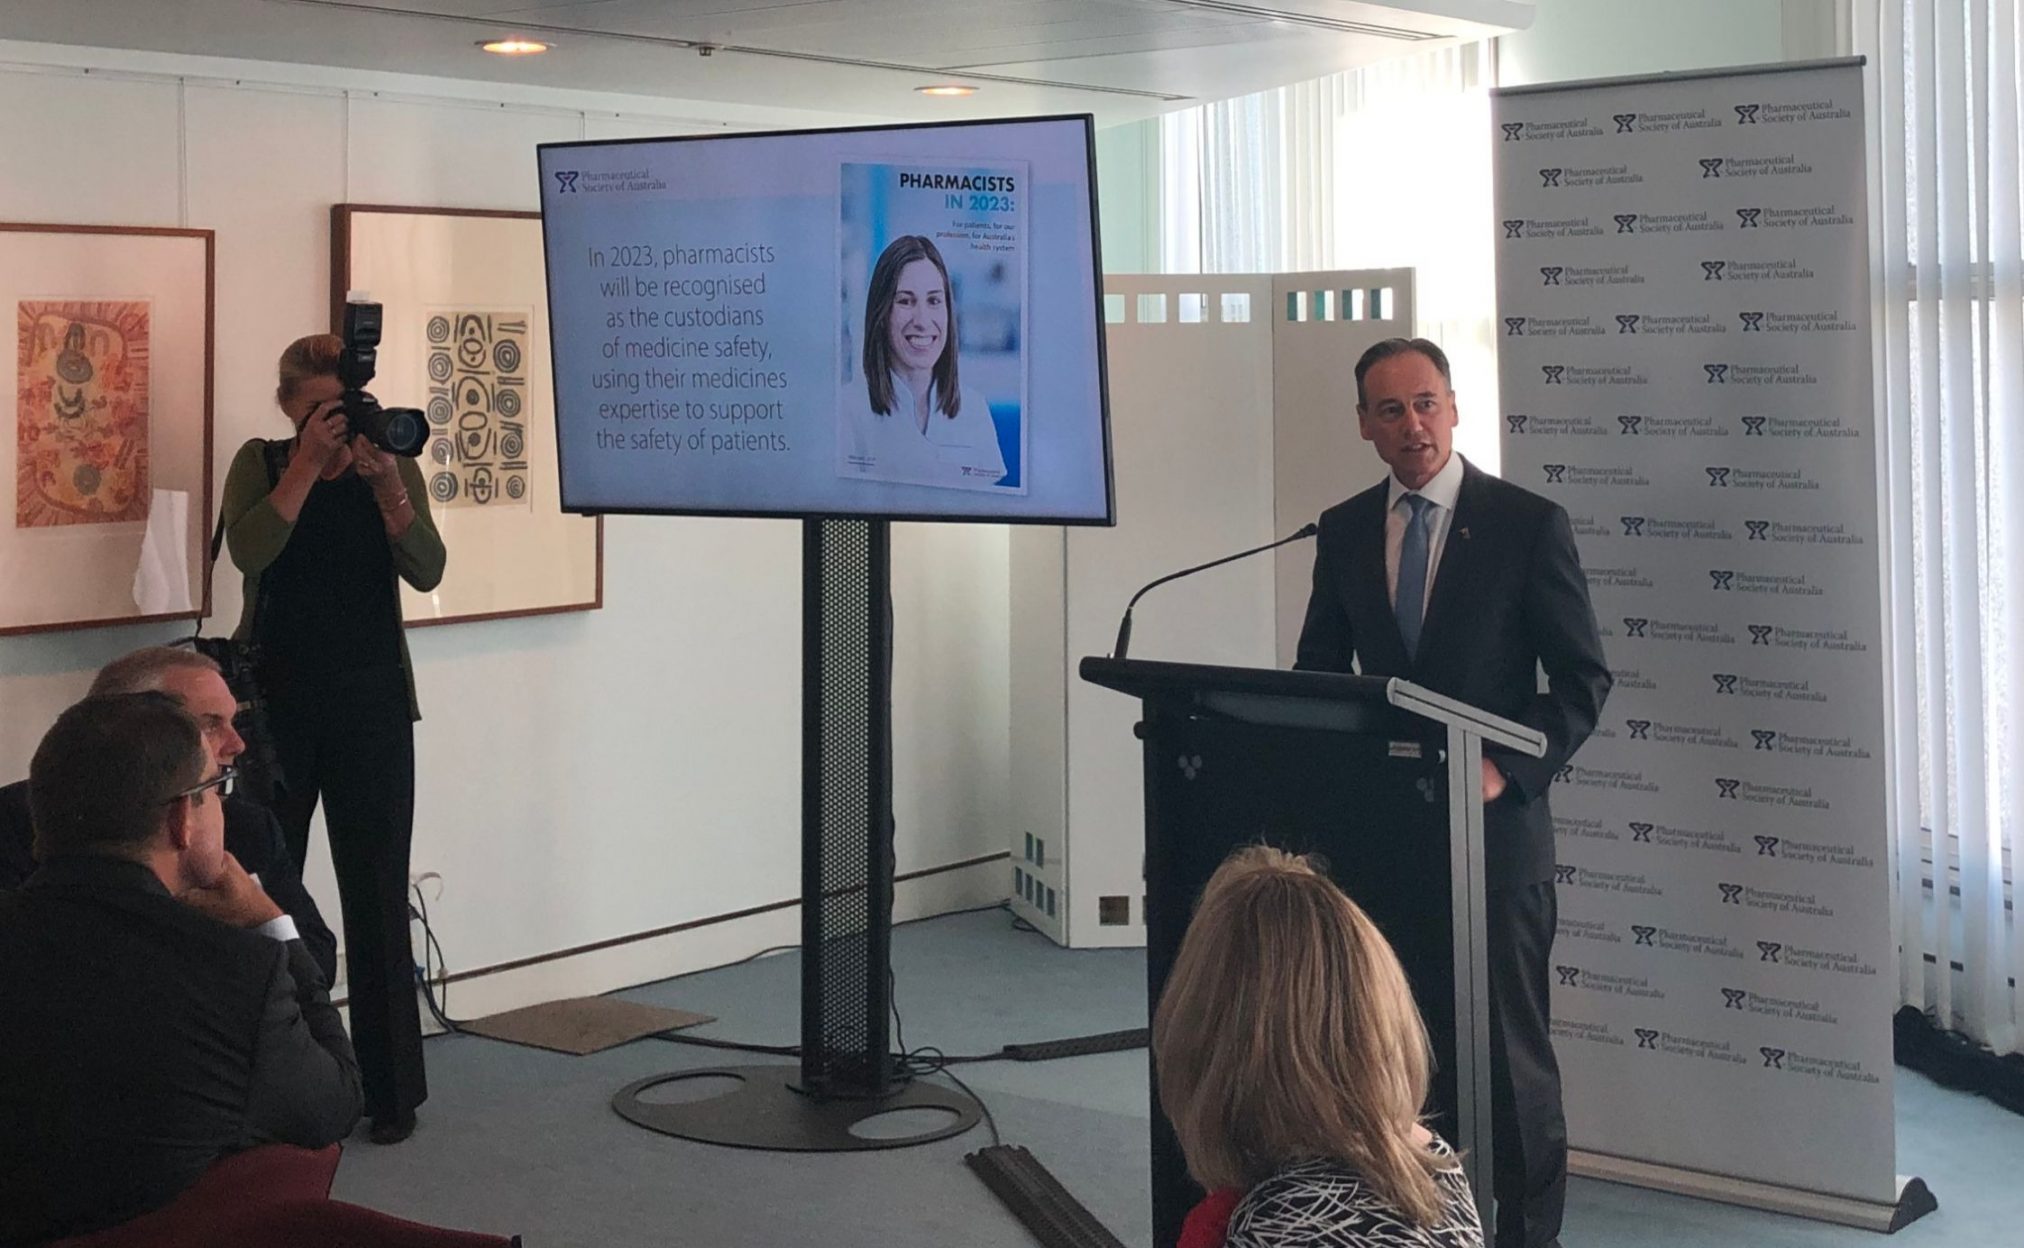 Greg Hunt speaks at the launch of Pharmacists in 2023